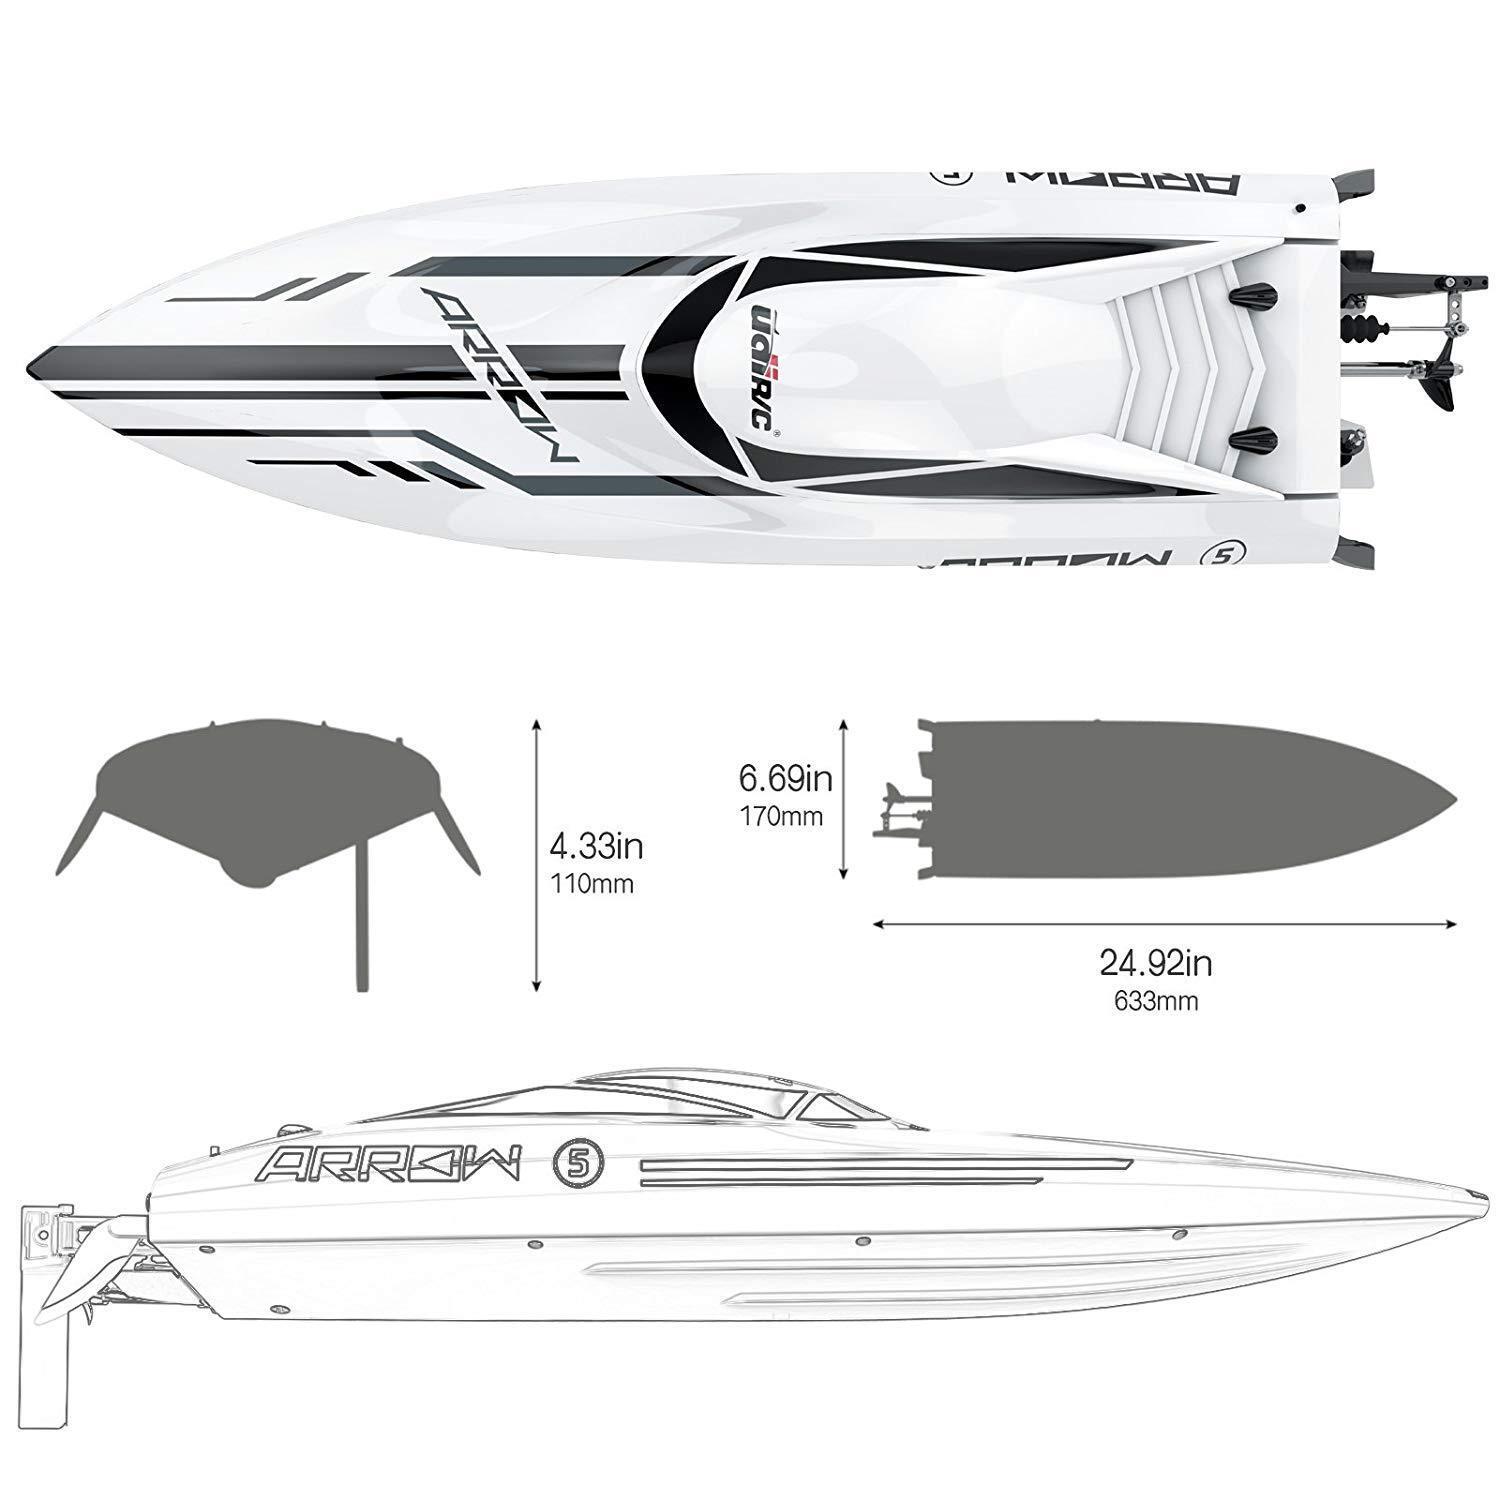 Rc Boat Arrow: High-speed performance and durability in the RC boat Arrow.